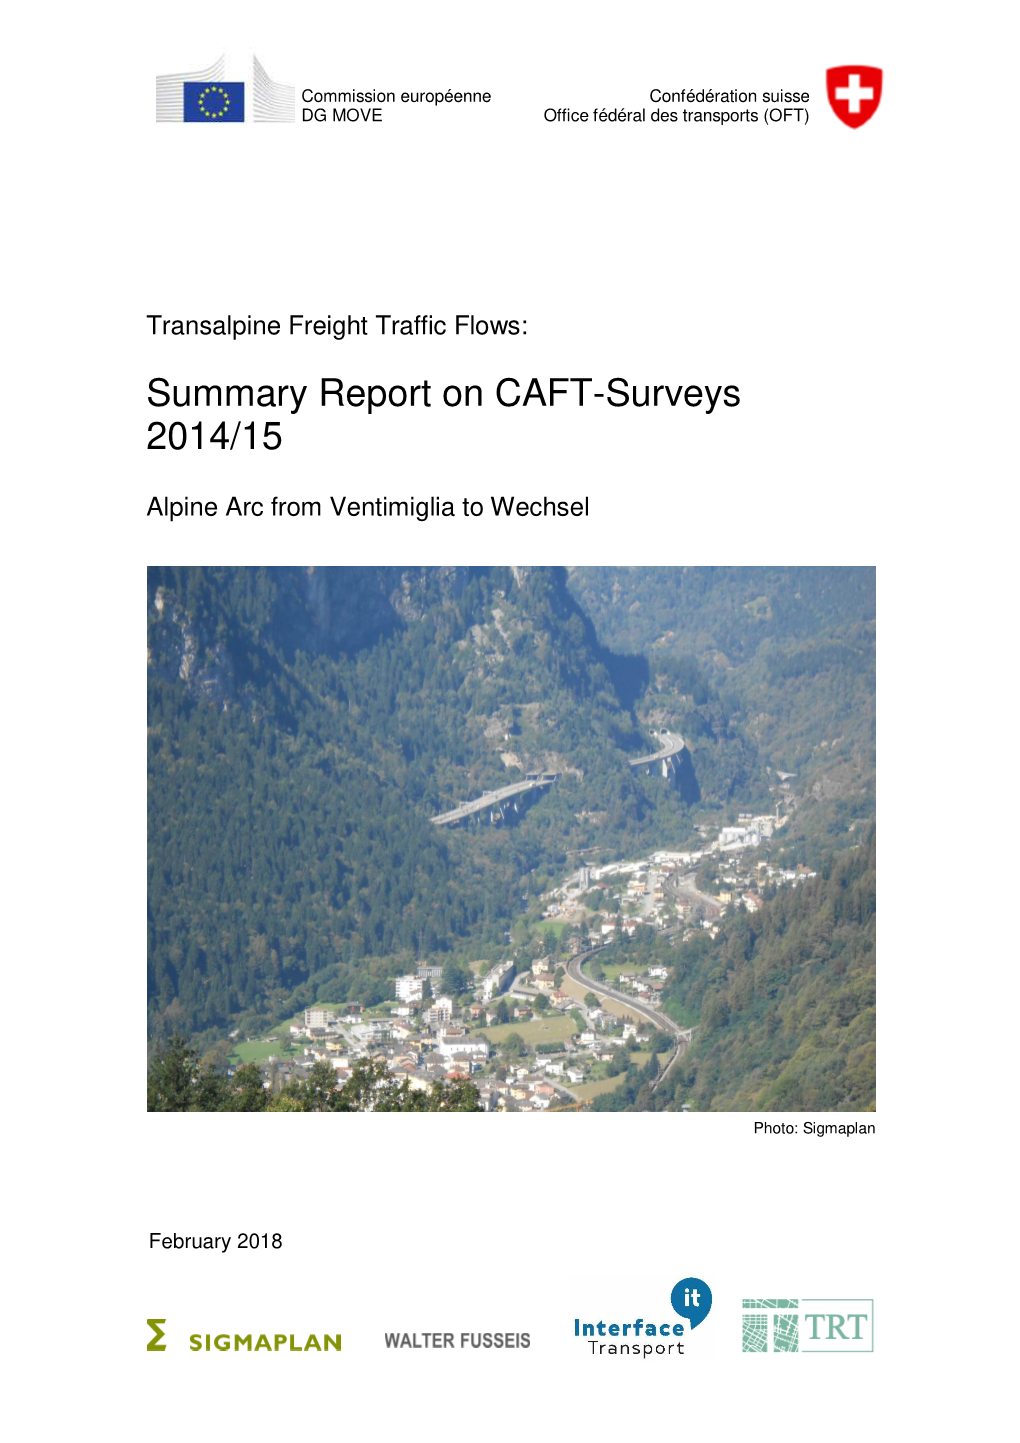 Summary Report of the 2014/15 CAFT Surveys